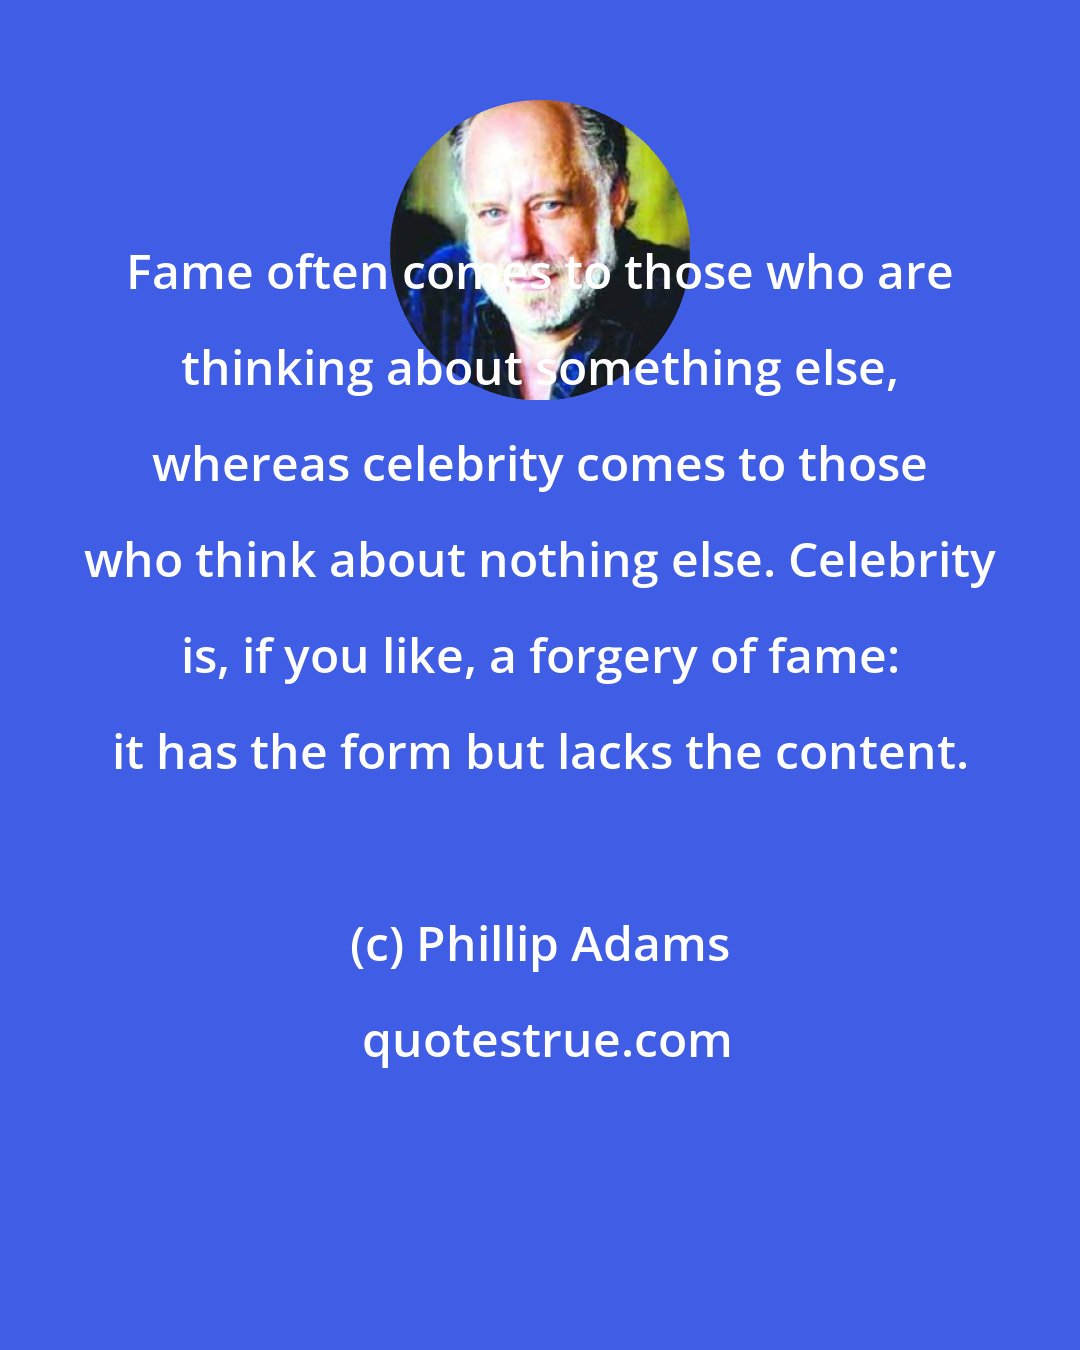 Phillip Adams: Fame often comes to those who are thinking about something else, whereas celebrity comes to those who think about nothing else. Celebrity is, if you like, a forgery of fame: it has the form but lacks the content.